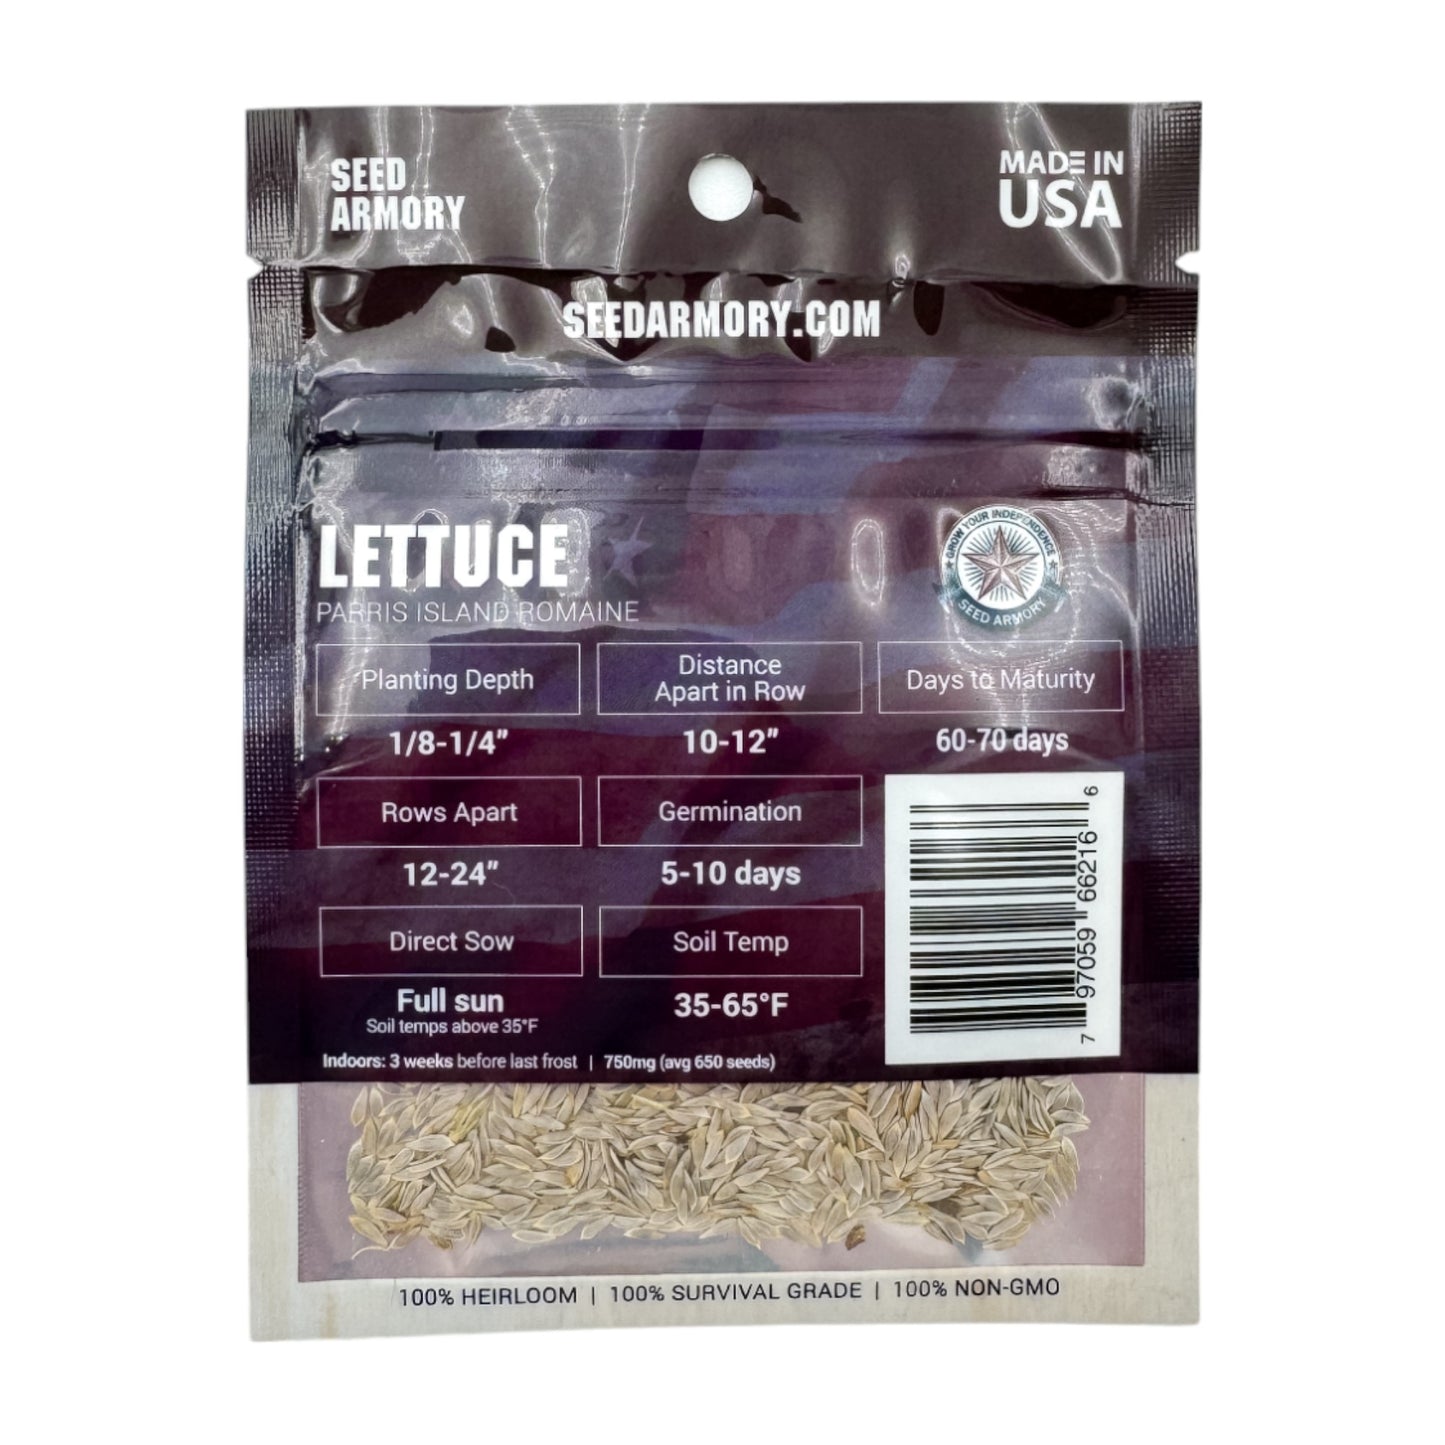 Reverse packet of Heirloom Parris Island Romaine lettuce seeds with planting instructions